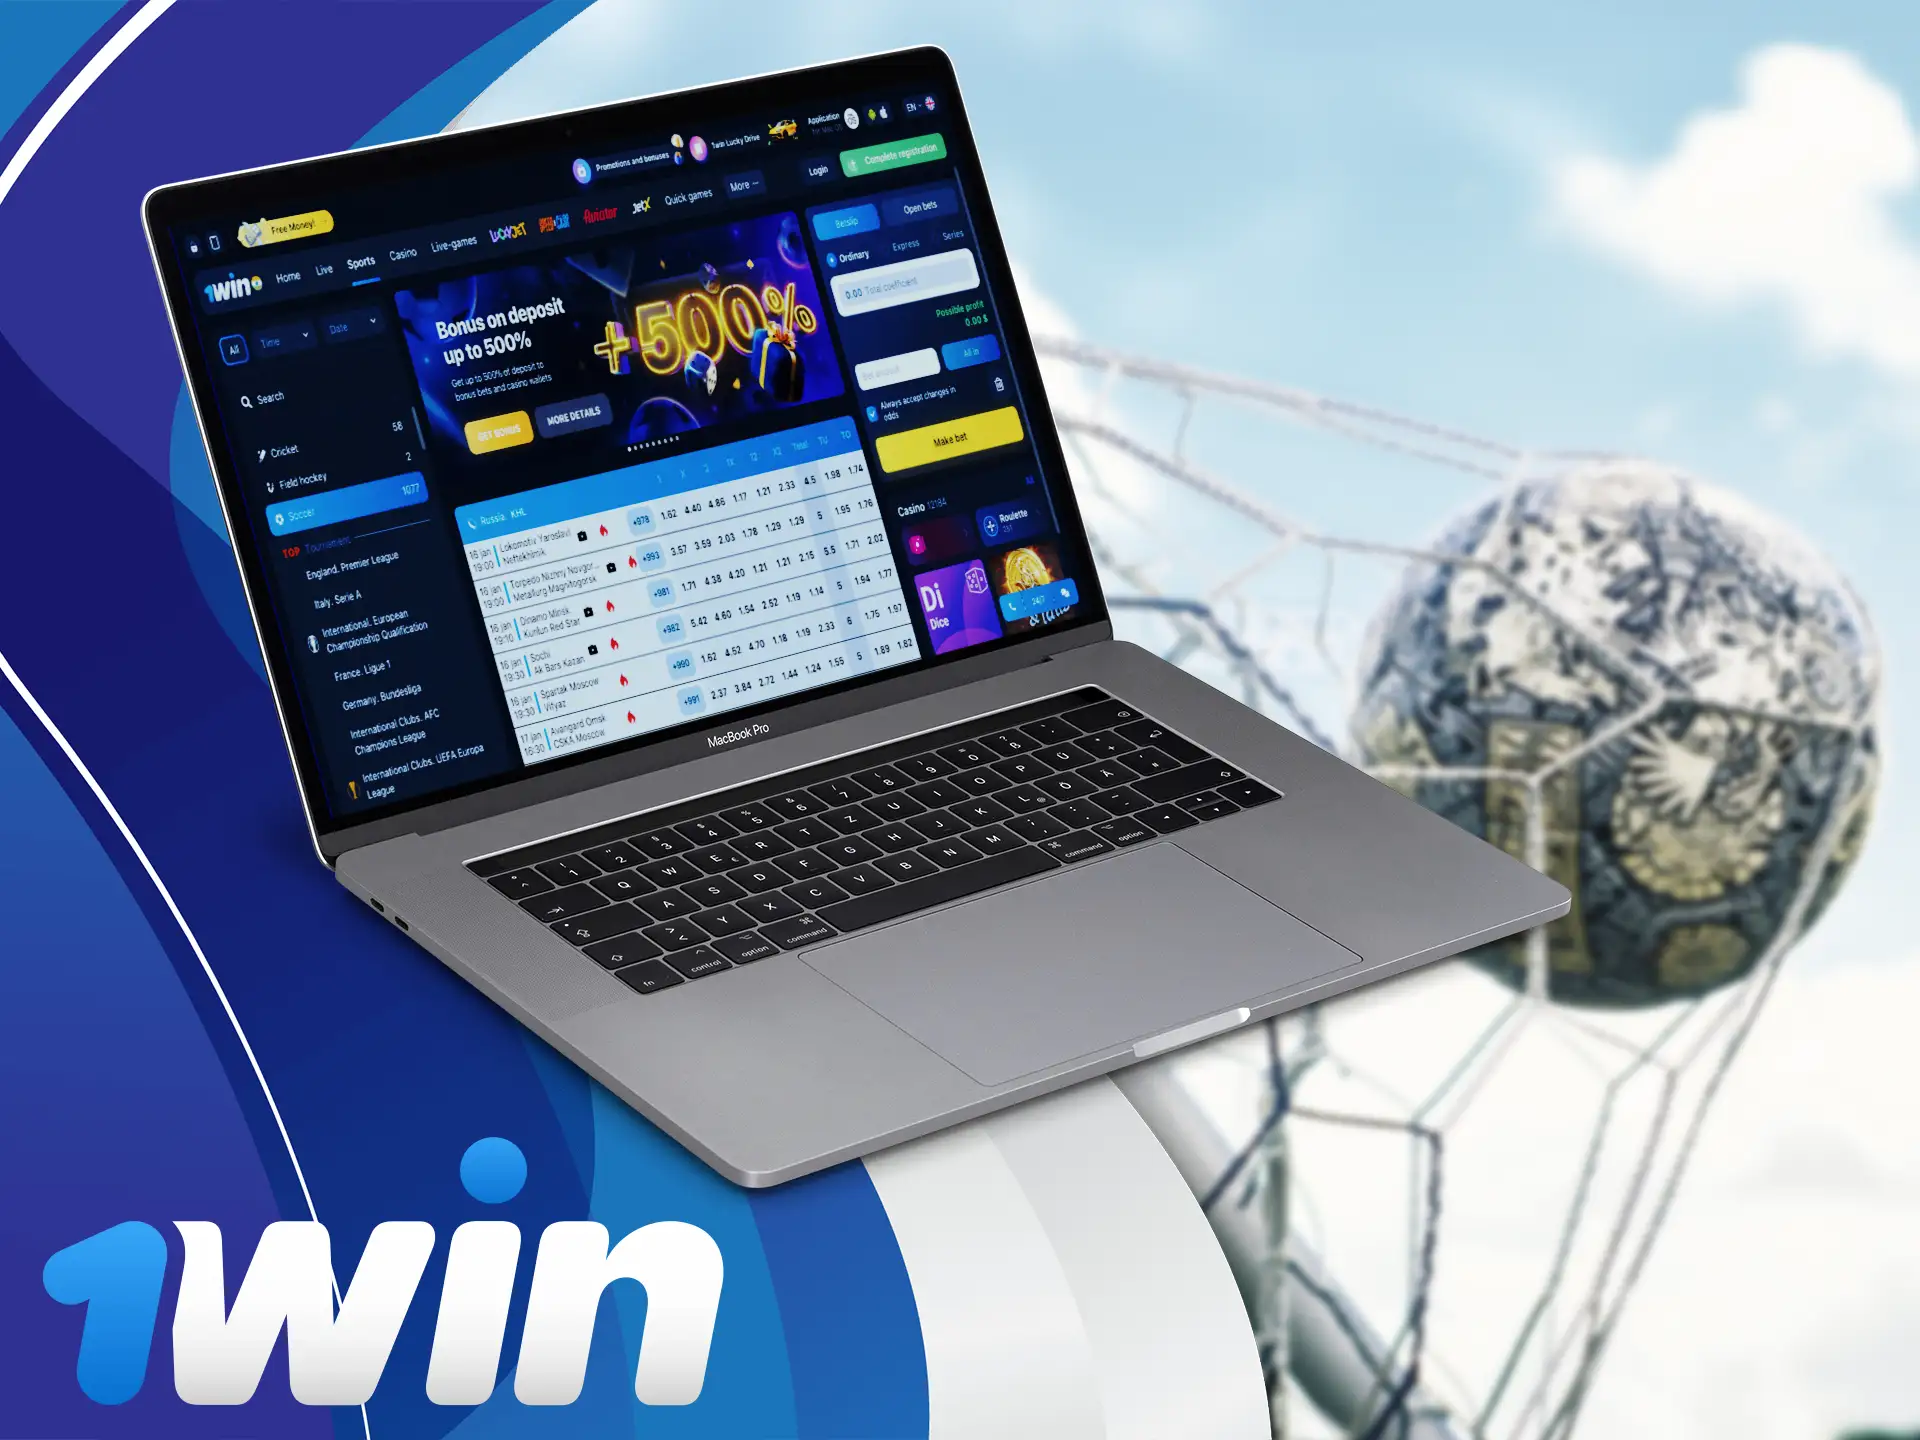 Over a million people place football bets on the 1Win app or website, the reputation of this bookmaker is something to look out for.